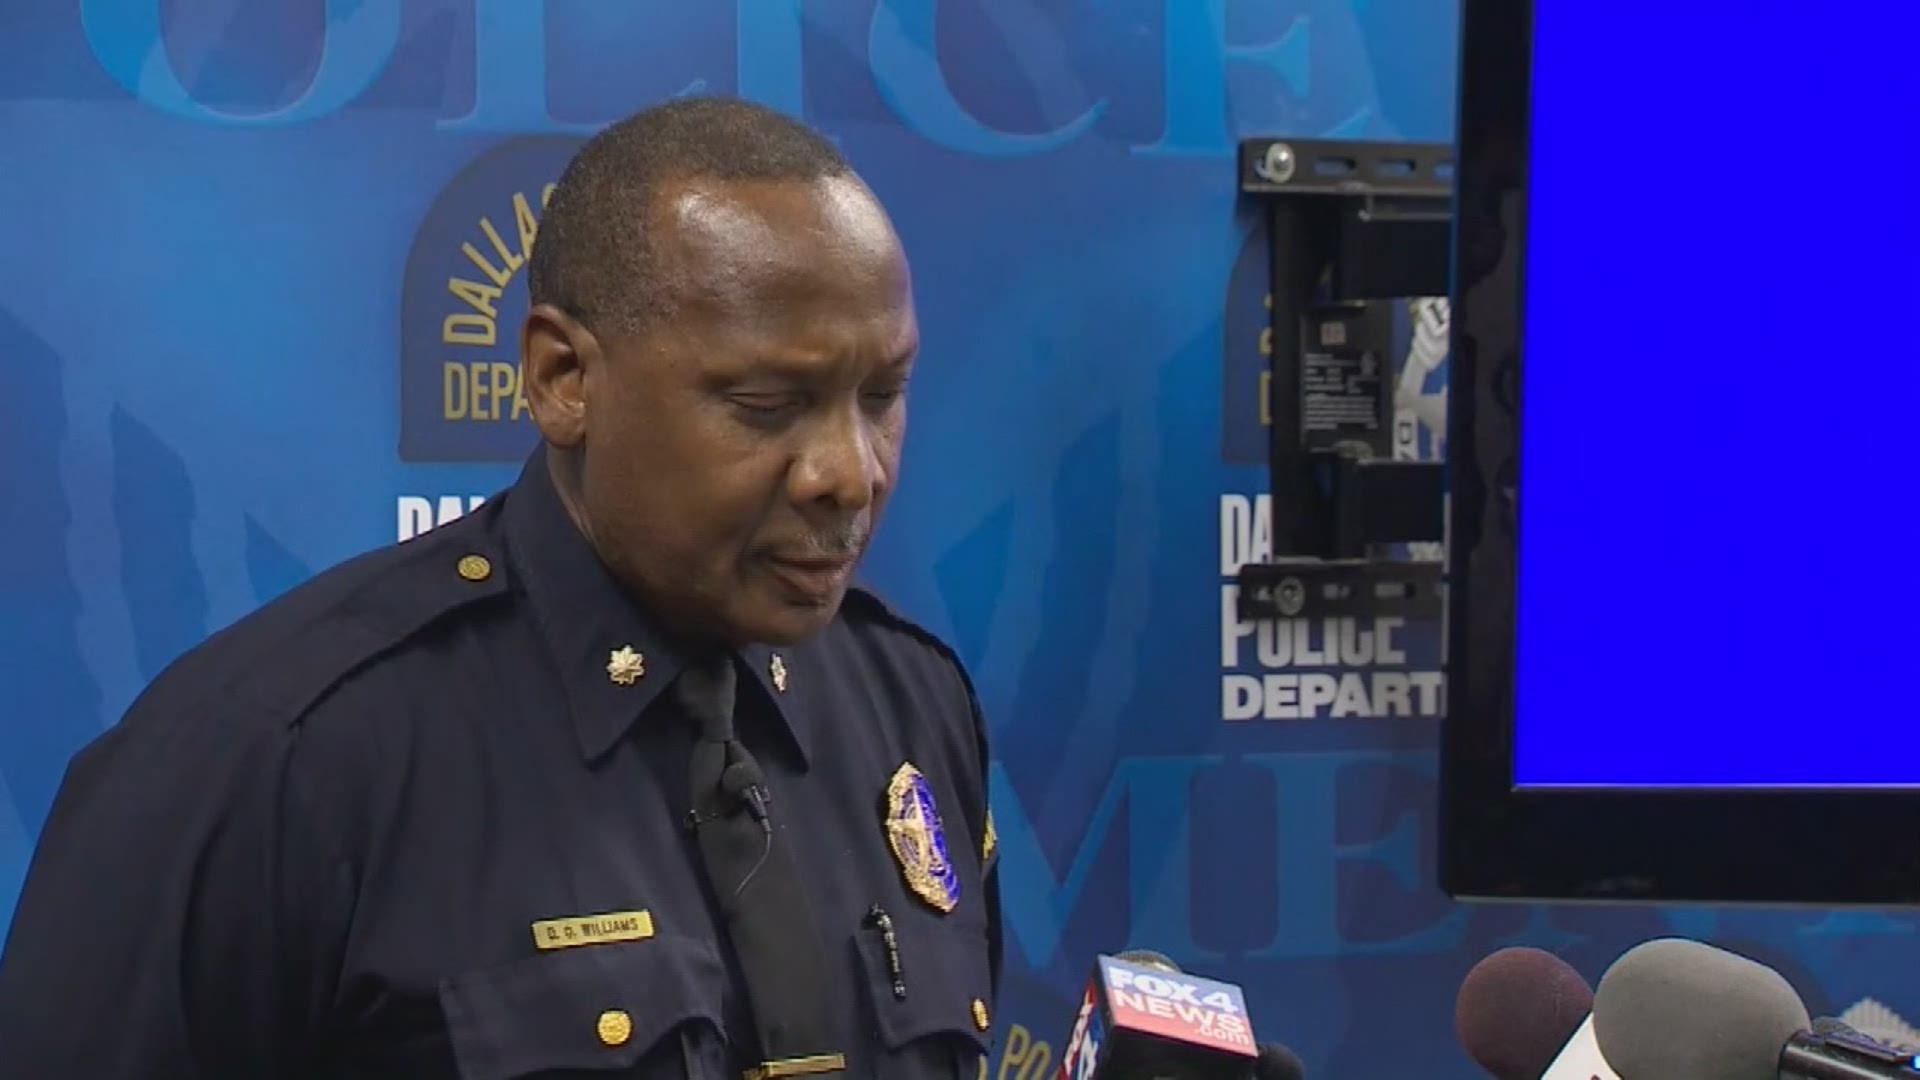 Dallas police discuss their search for two young males in connection to a kidnapping that led to a shooting and sexual assault.